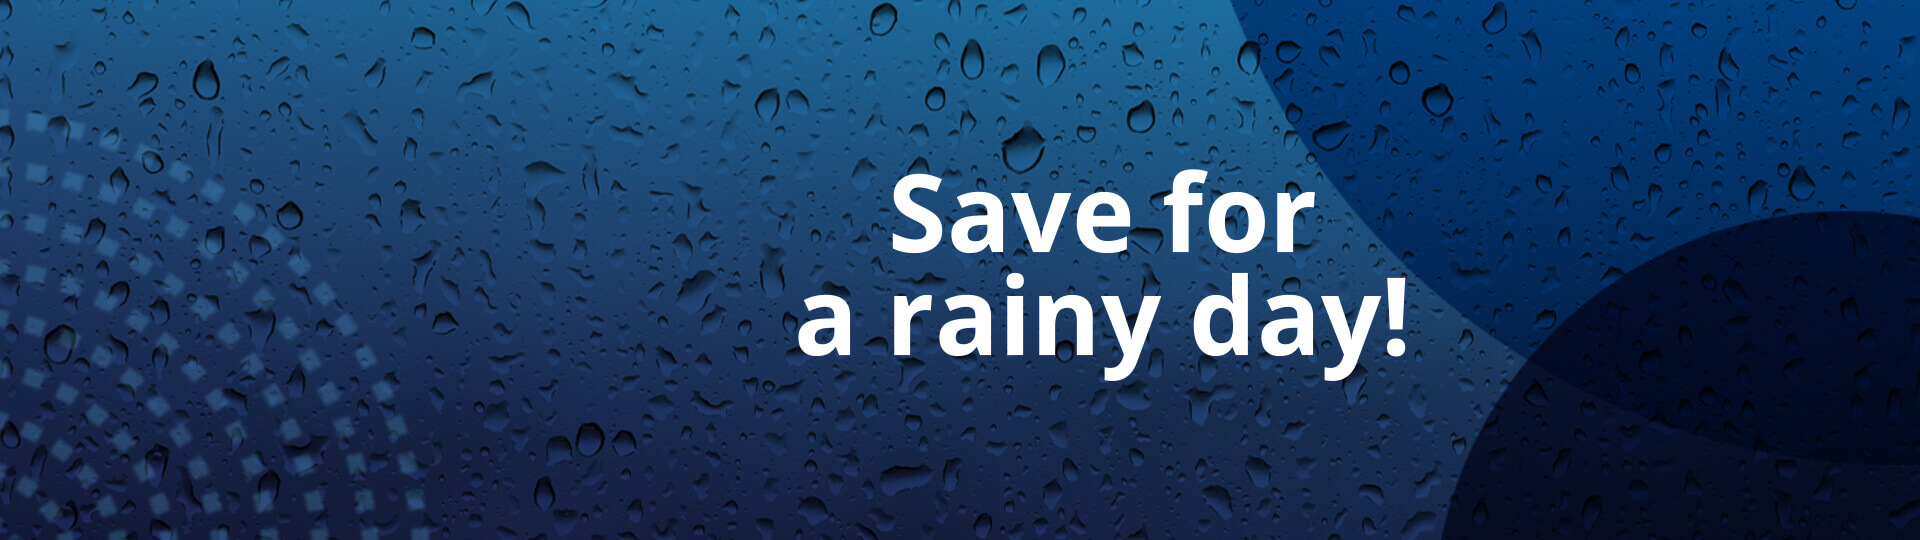 Image of a blue background with raindrops and text saying Save for a rainy day!